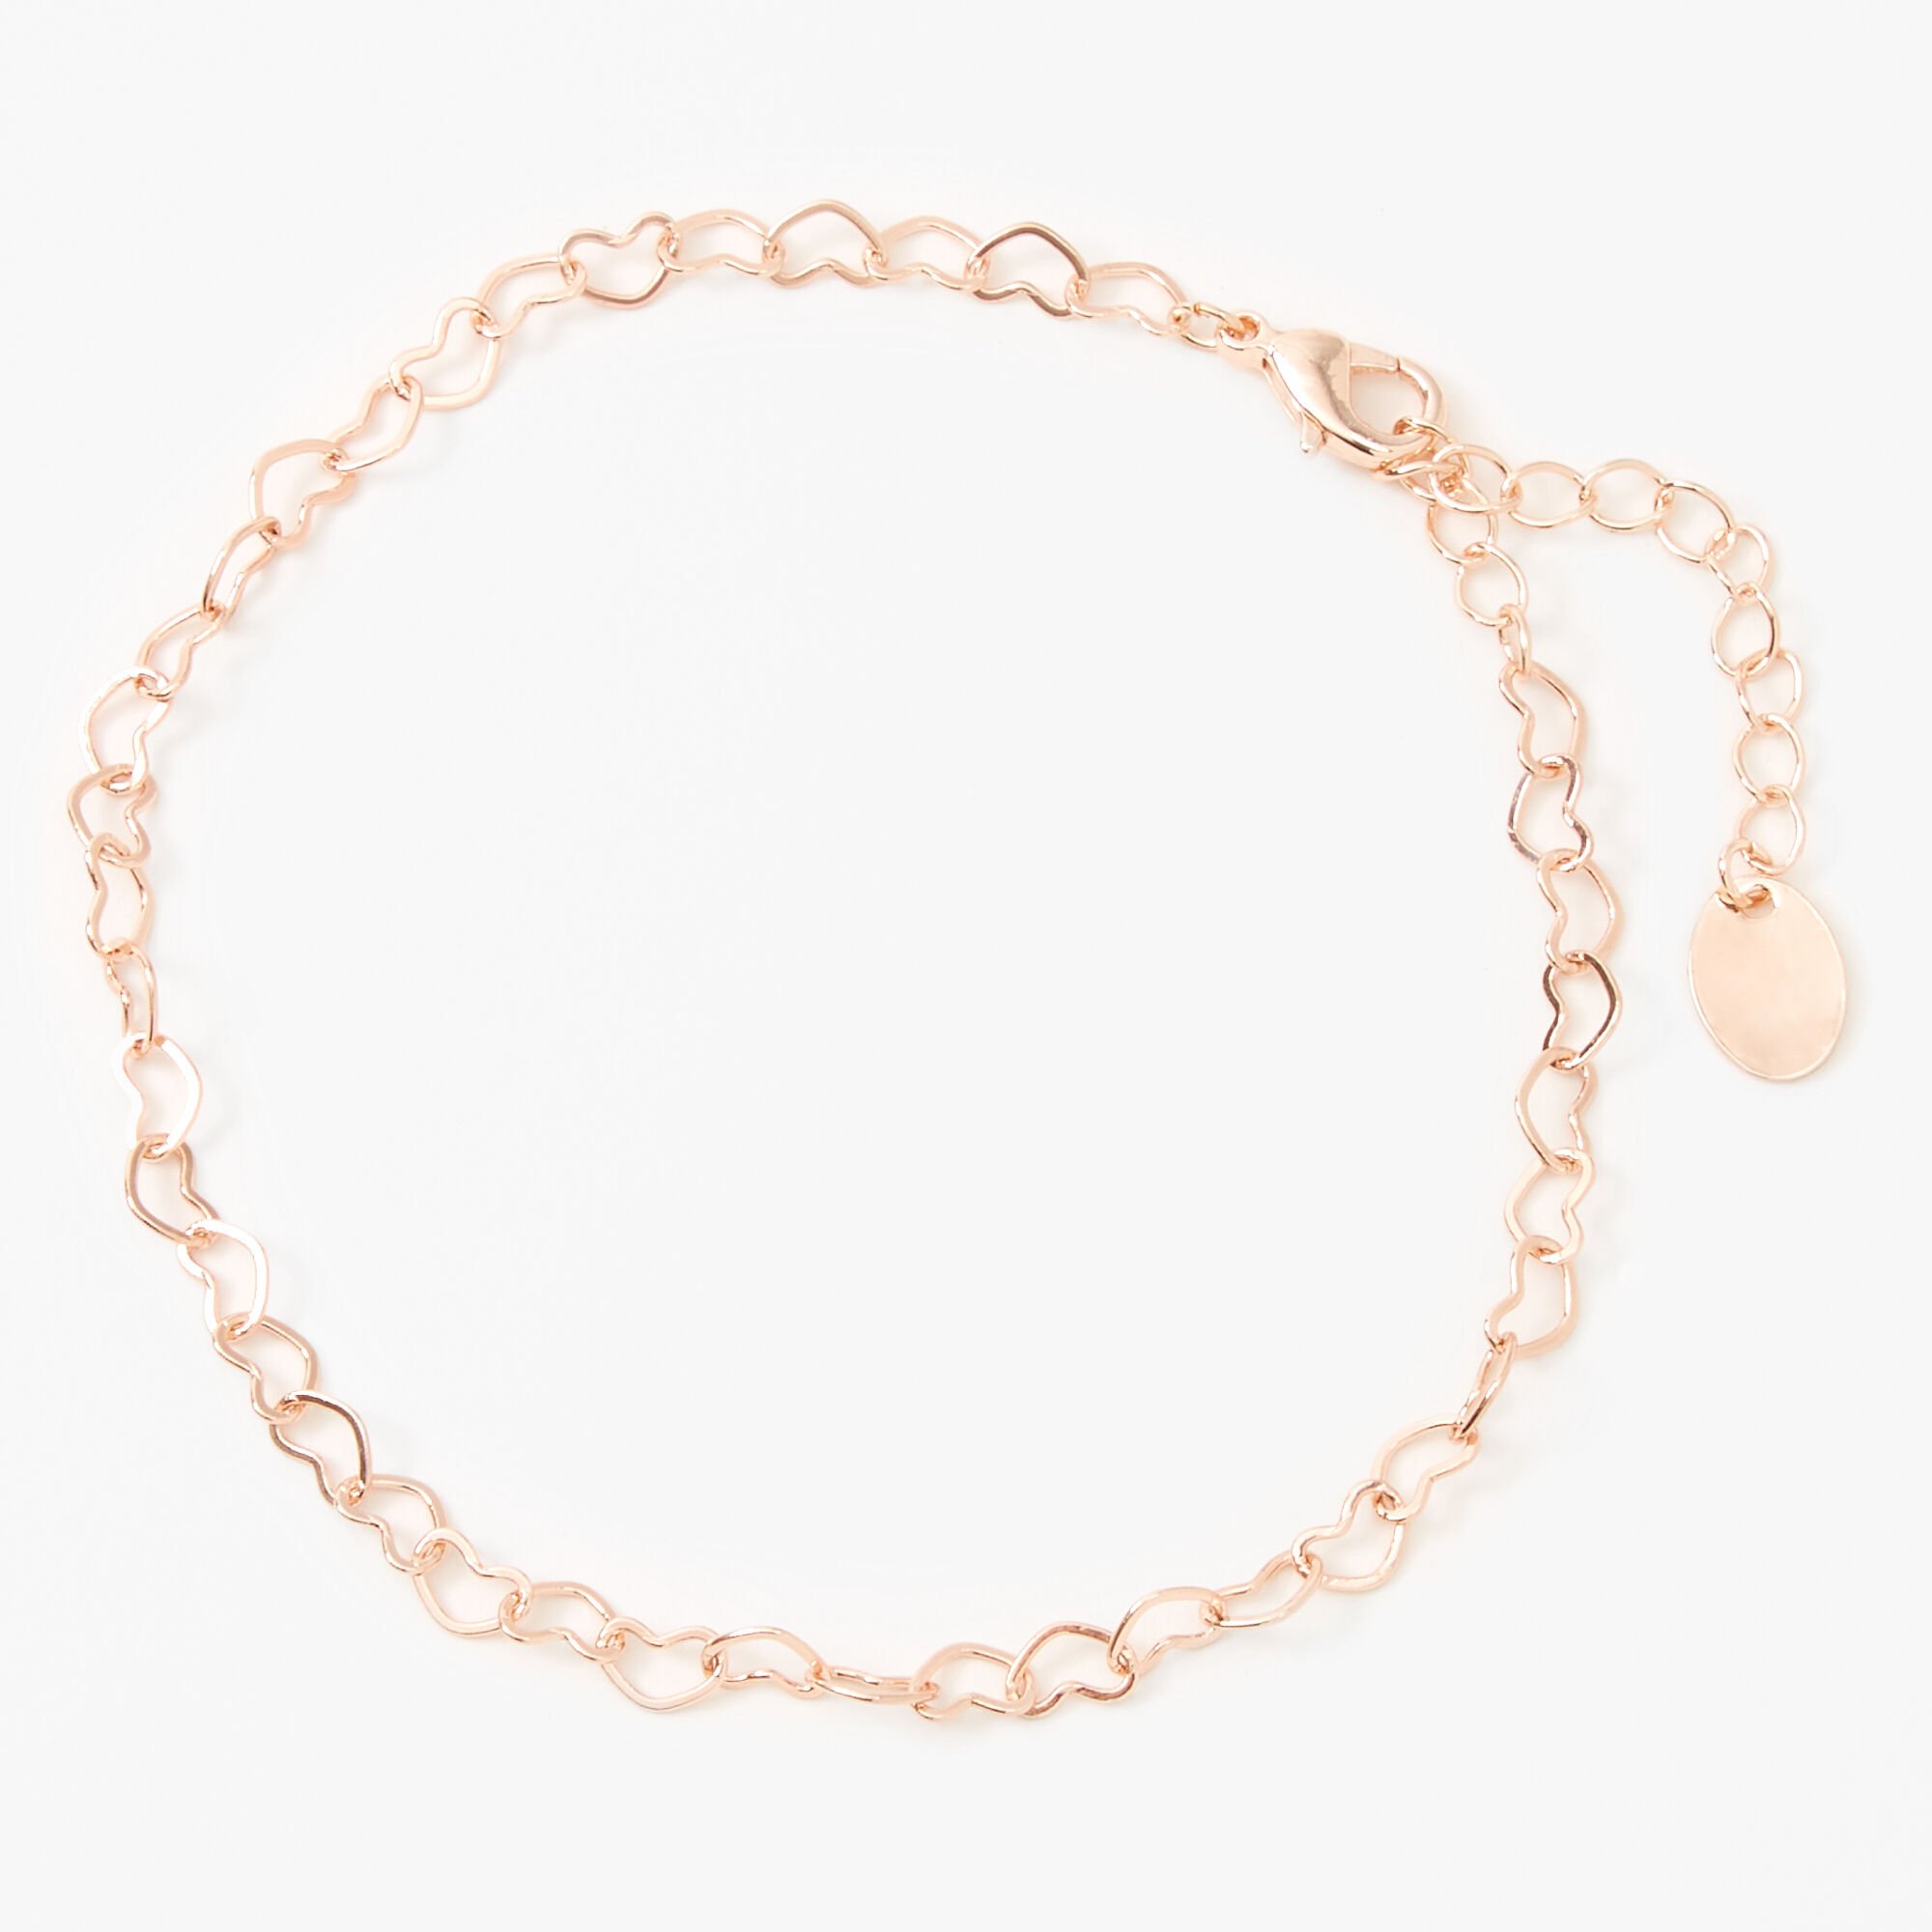 View Claires Tone Open Heart Chain Anklet Rose Gold information